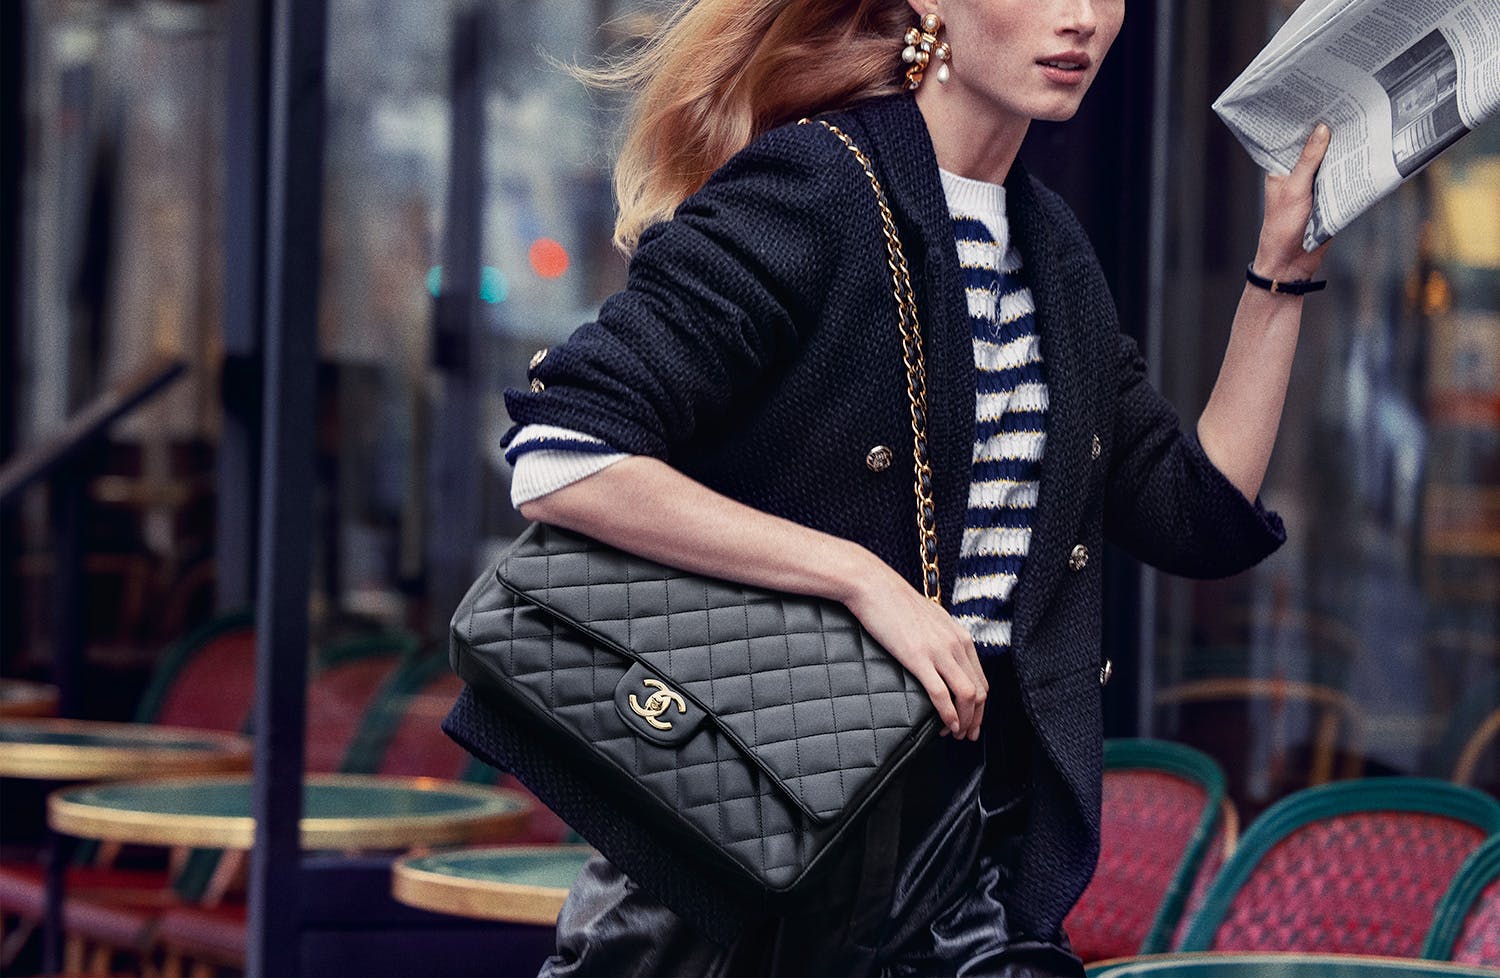 Sofia Coppola Brings an Icon to the Streets in Chanel's Latest Bag Campaign  - 11.12 Bag